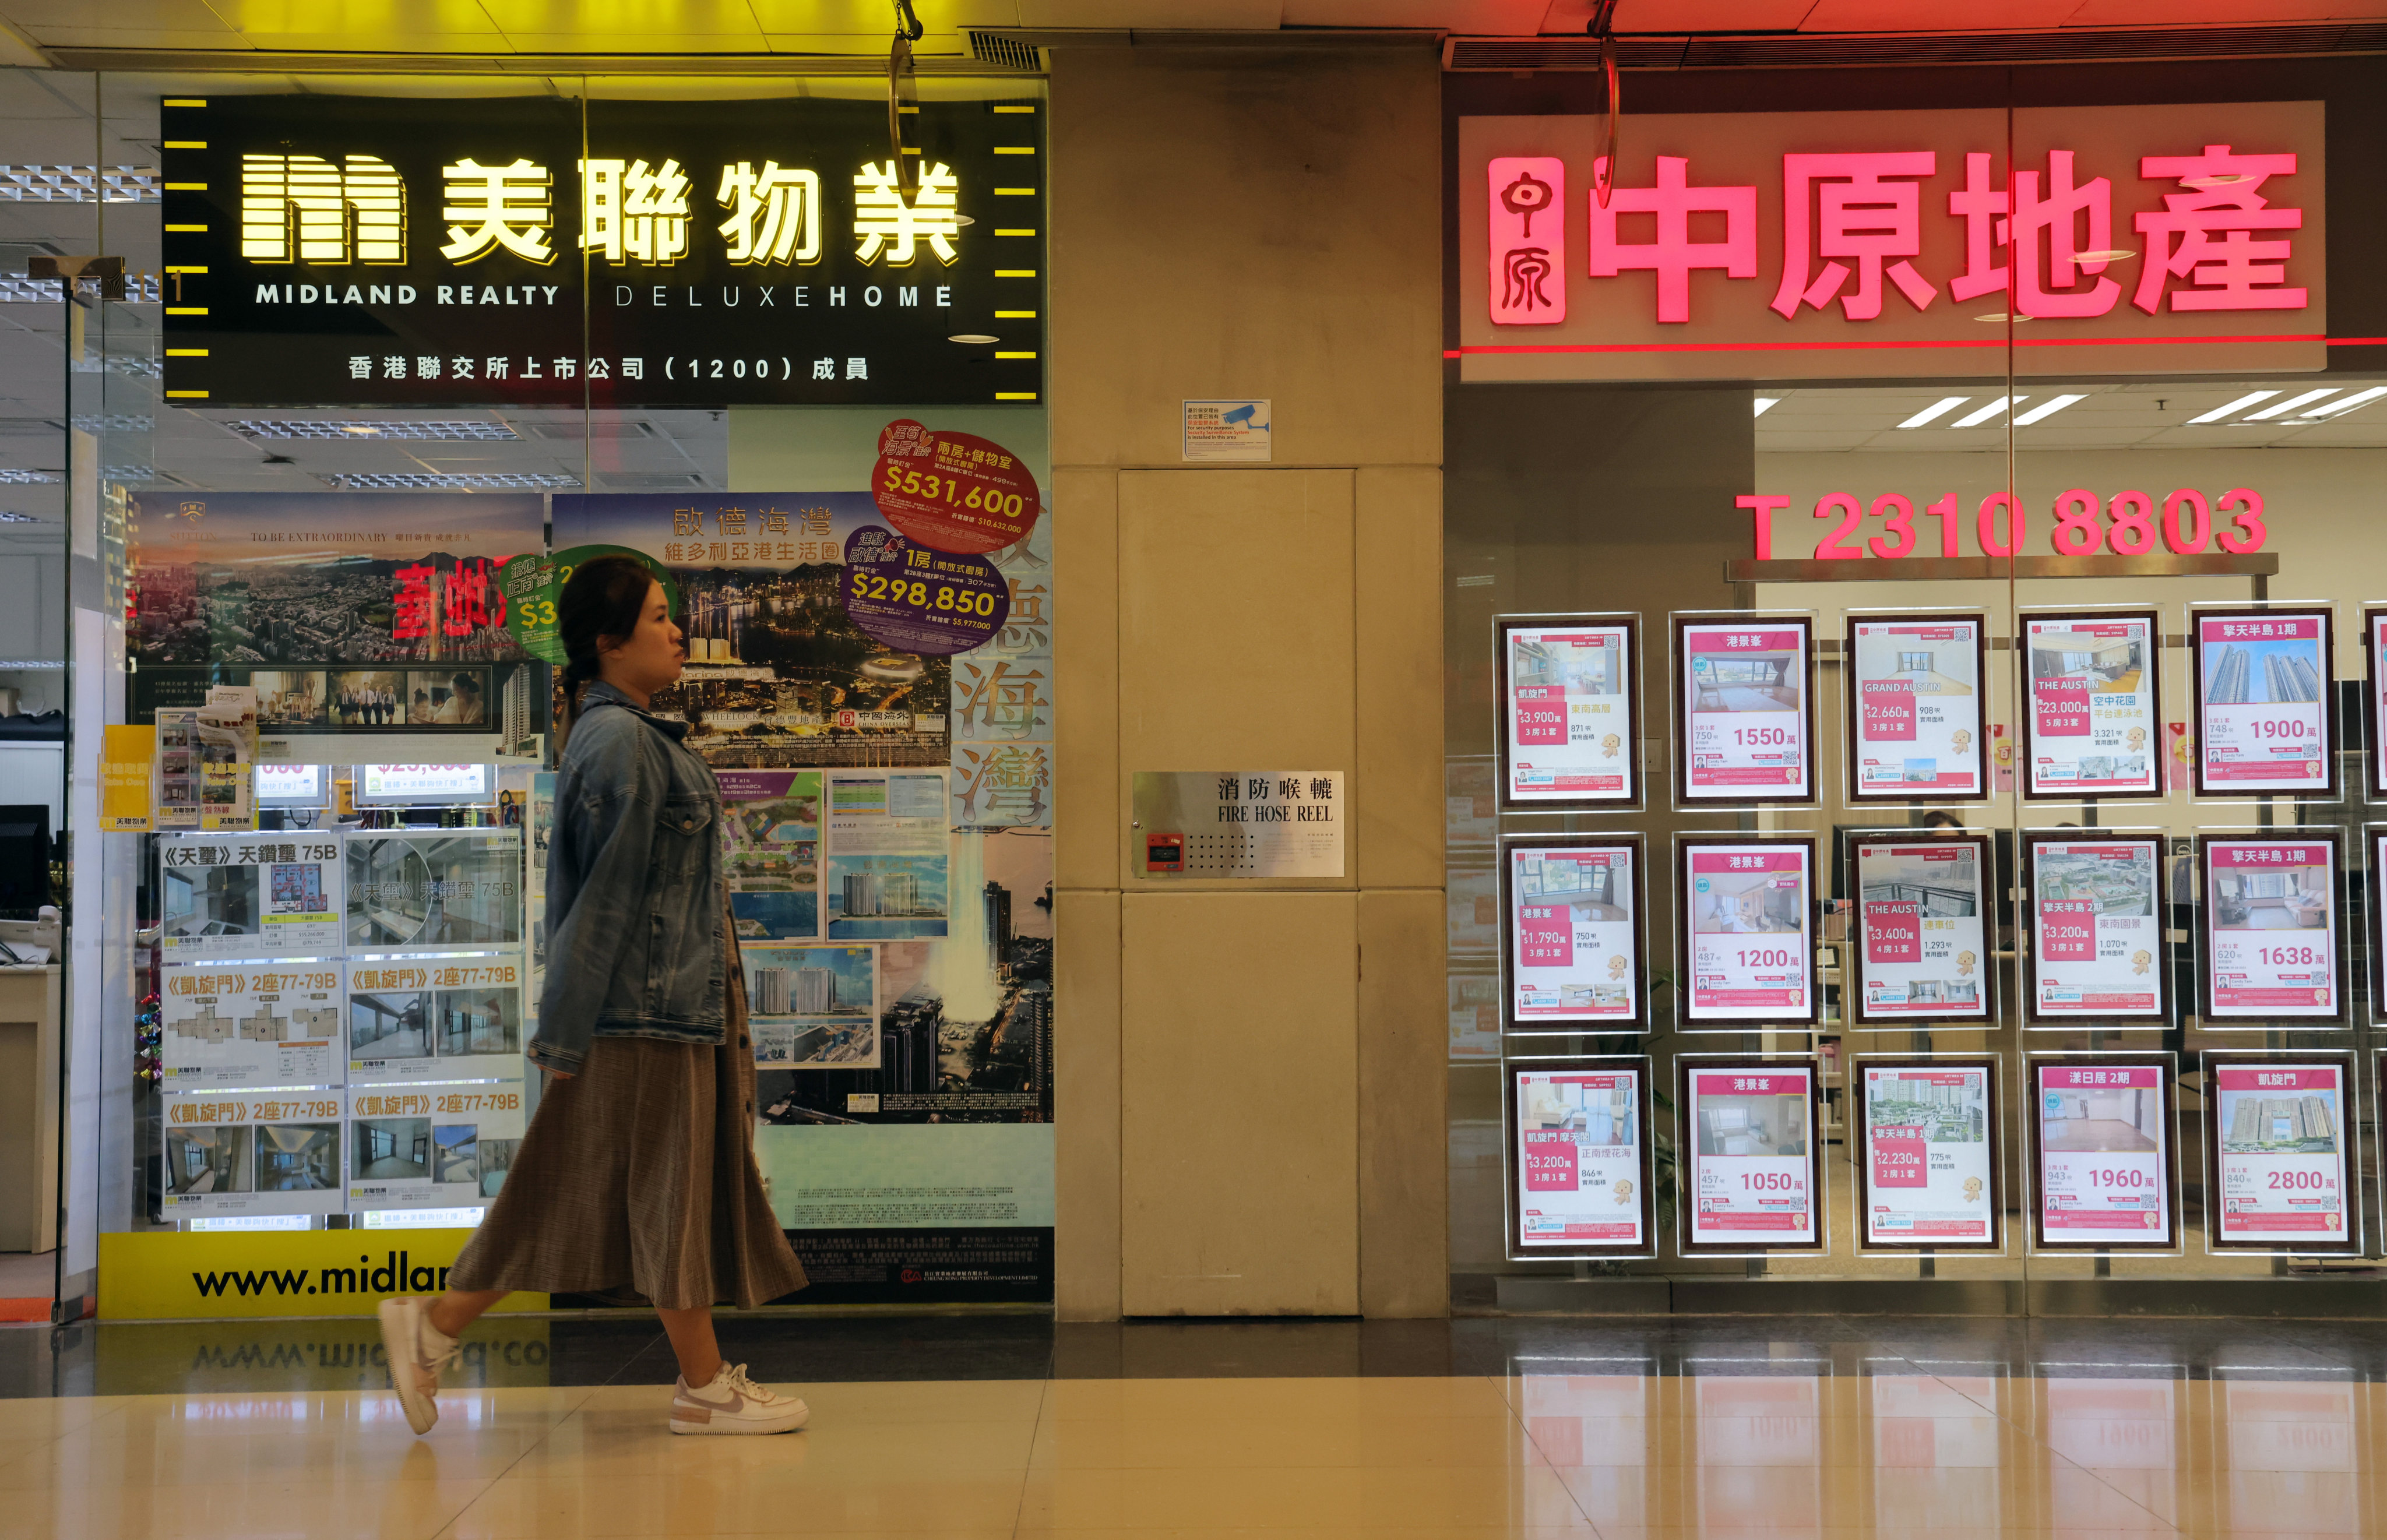 Midland Realty and Centaline Property Agency are involved in nearly 90 per cent of all real estate transactions in Hong Kong. Photo: SCMP